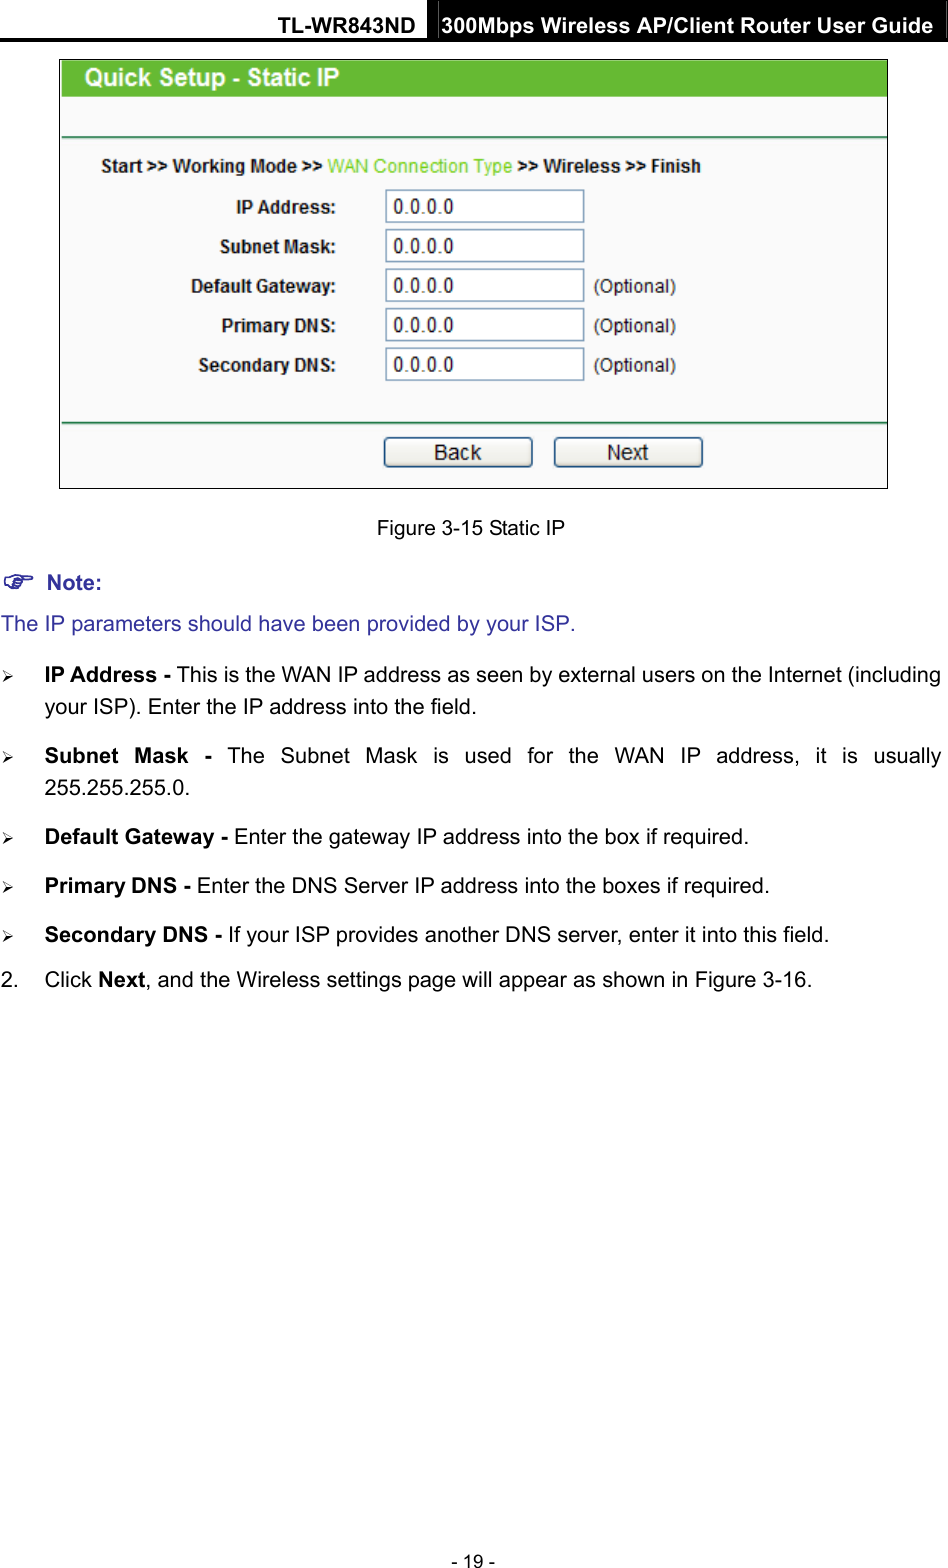 TL-WR843ND 300Mbps Wireless AP/Client Router User Guide - 19 -  Figure 3-15 Static IP  Note: The IP parameters should have been provided by your ISP.  IP Address - This is the WAN IP address as seen by external users on the Internet (including your ISP). Enter the IP address into the field.  Subnet Mask - The Subnet Mask is used for the WAN IP address, it is usually 255.255.255.0.  Default Gateway - Enter the gateway IP address into the box if required.  Primary DNS - Enter the DNS Server IP address into the boxes if required.  Secondary DNS - If your ISP provides another DNS server, enter it into this field. 2. Click Next, and the Wireless settings page will appear as shown in Figure 3-16. 